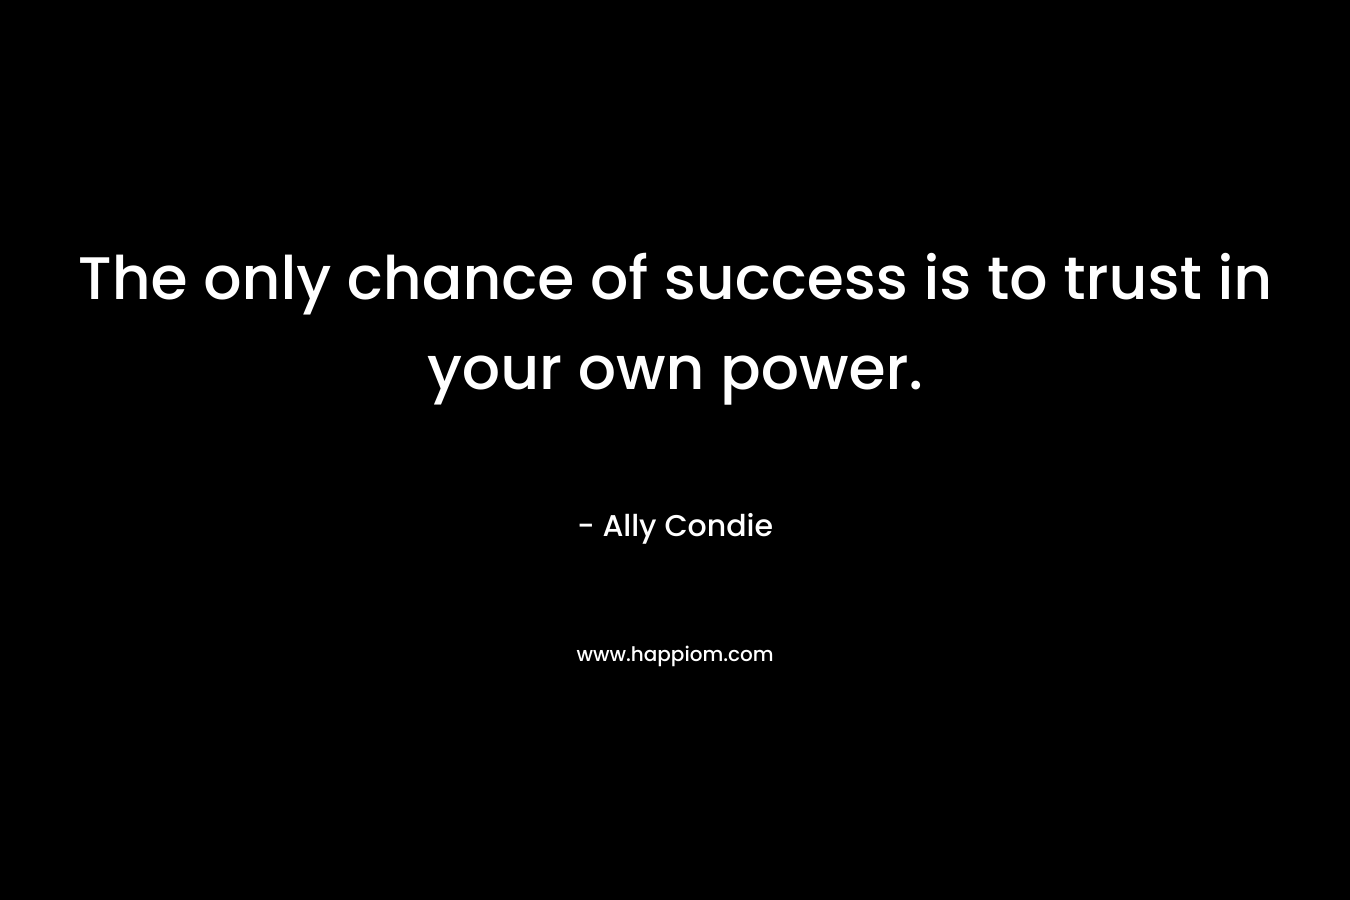 The only chance of success is to trust in your own power.